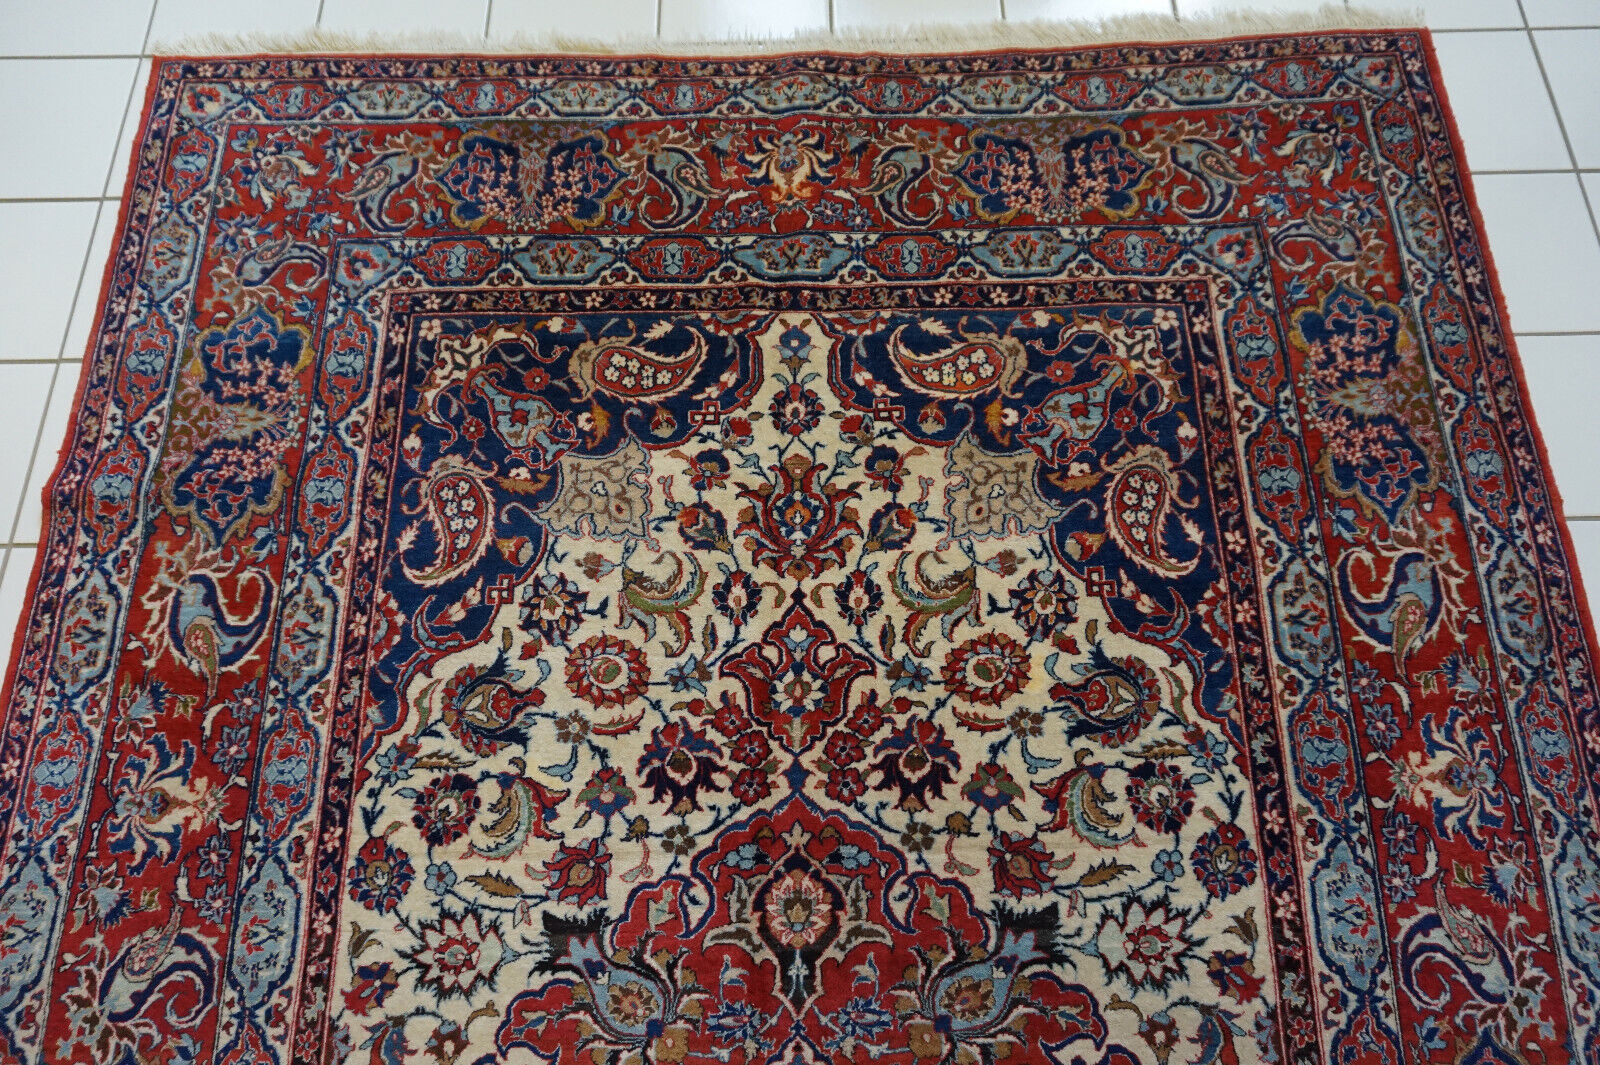 Front view of the Handmade Antique Persian Style Isfahan Rug highlighting its captivating colors